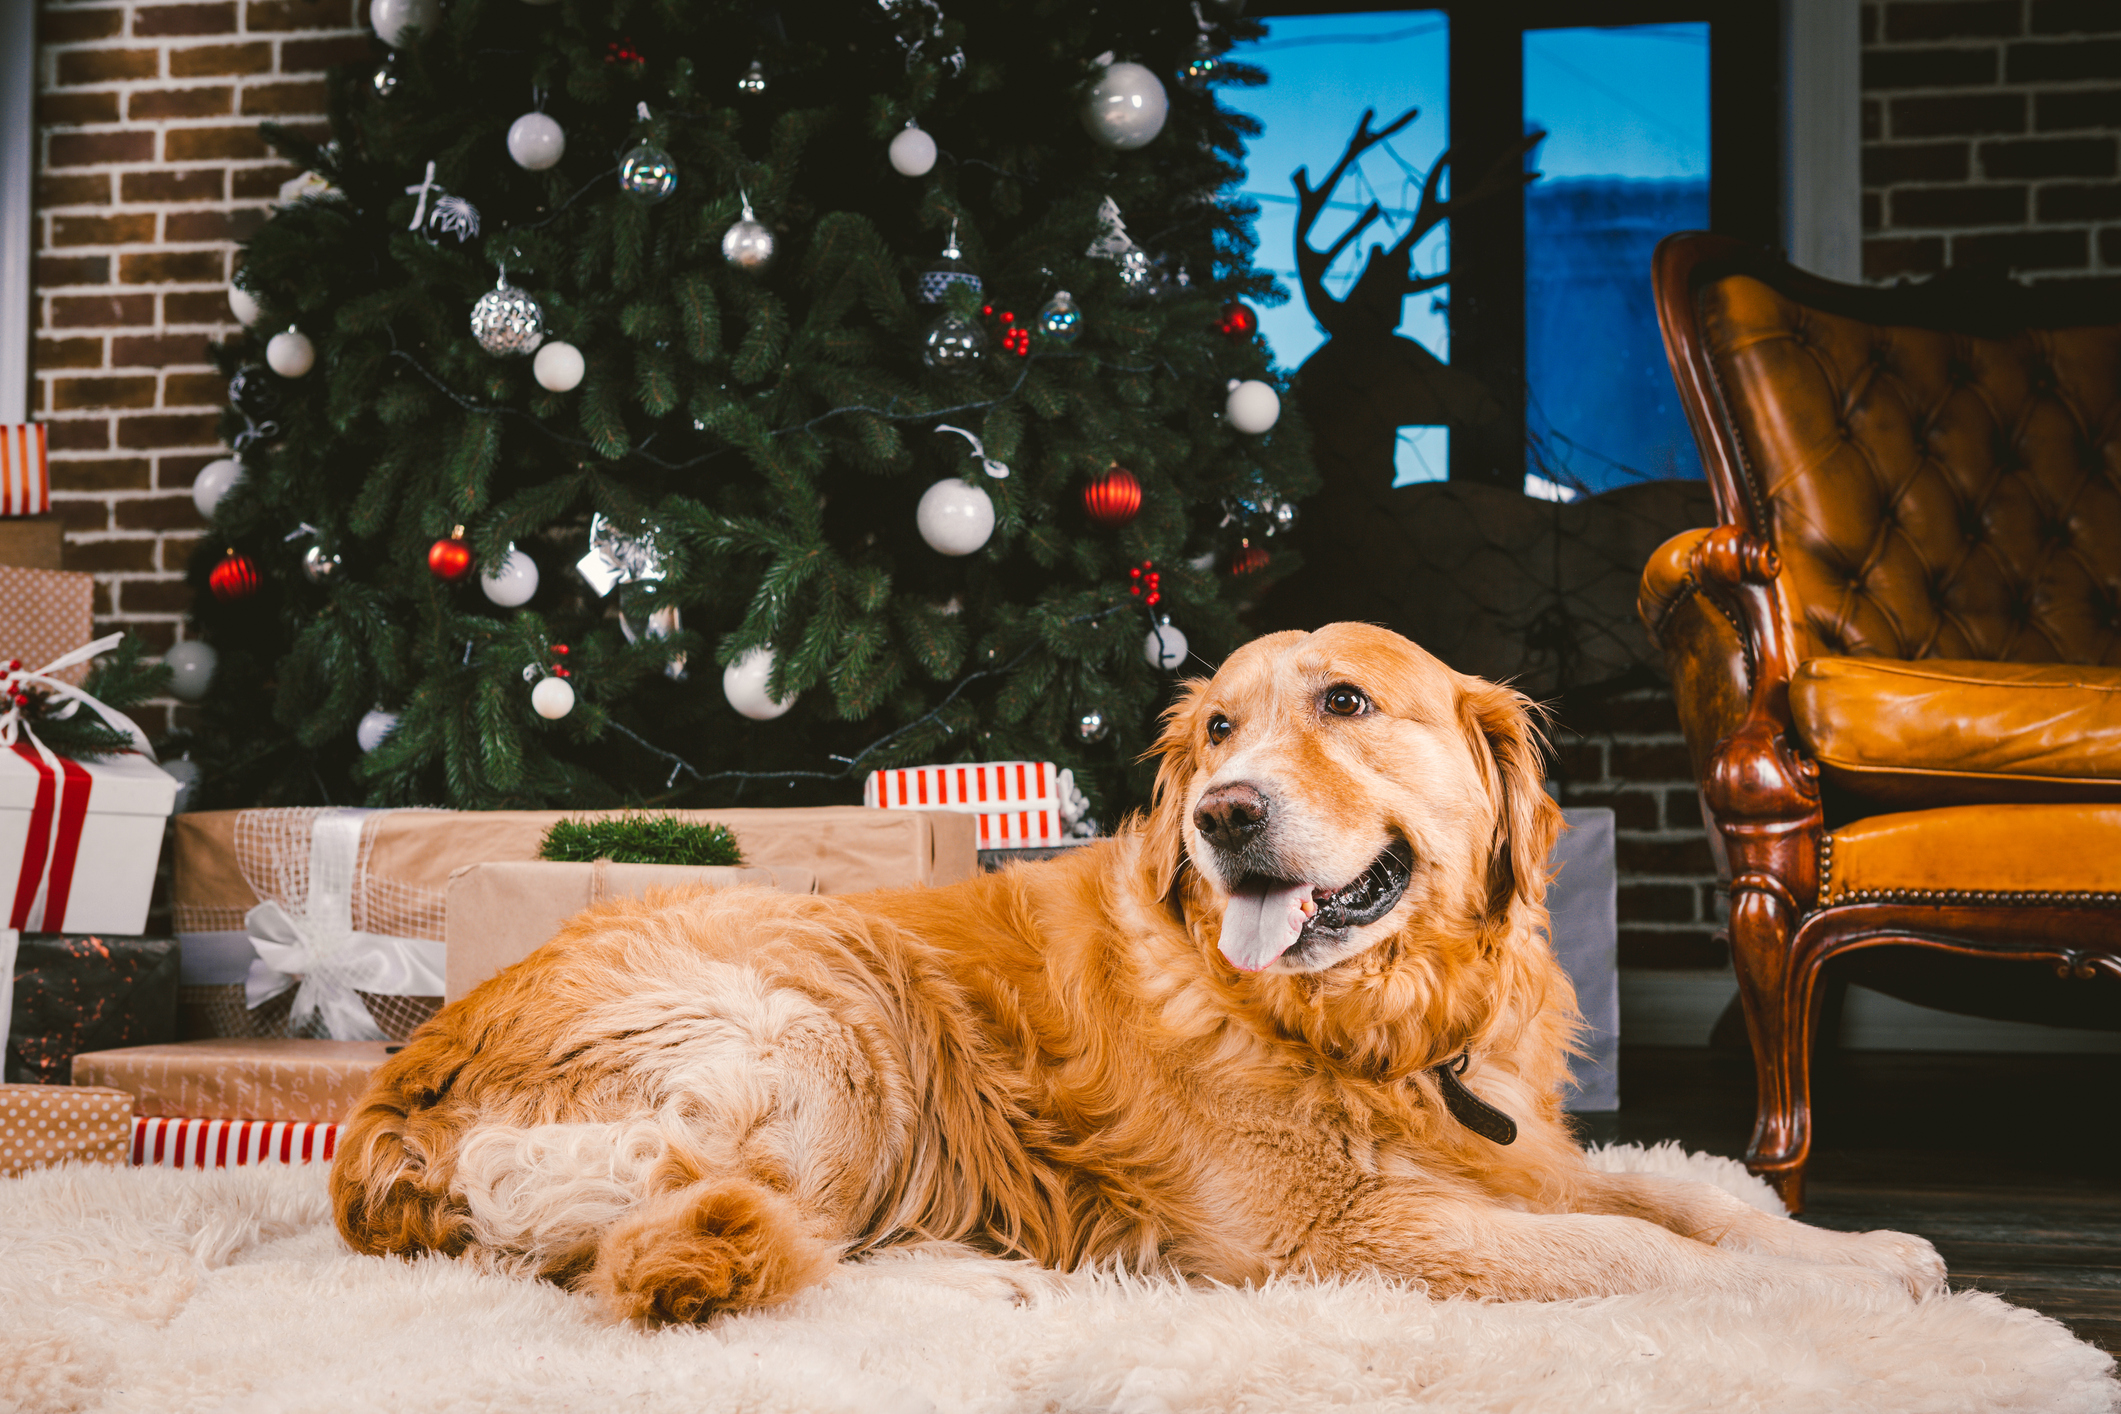 A dog sitting in-front of a Christmas tree